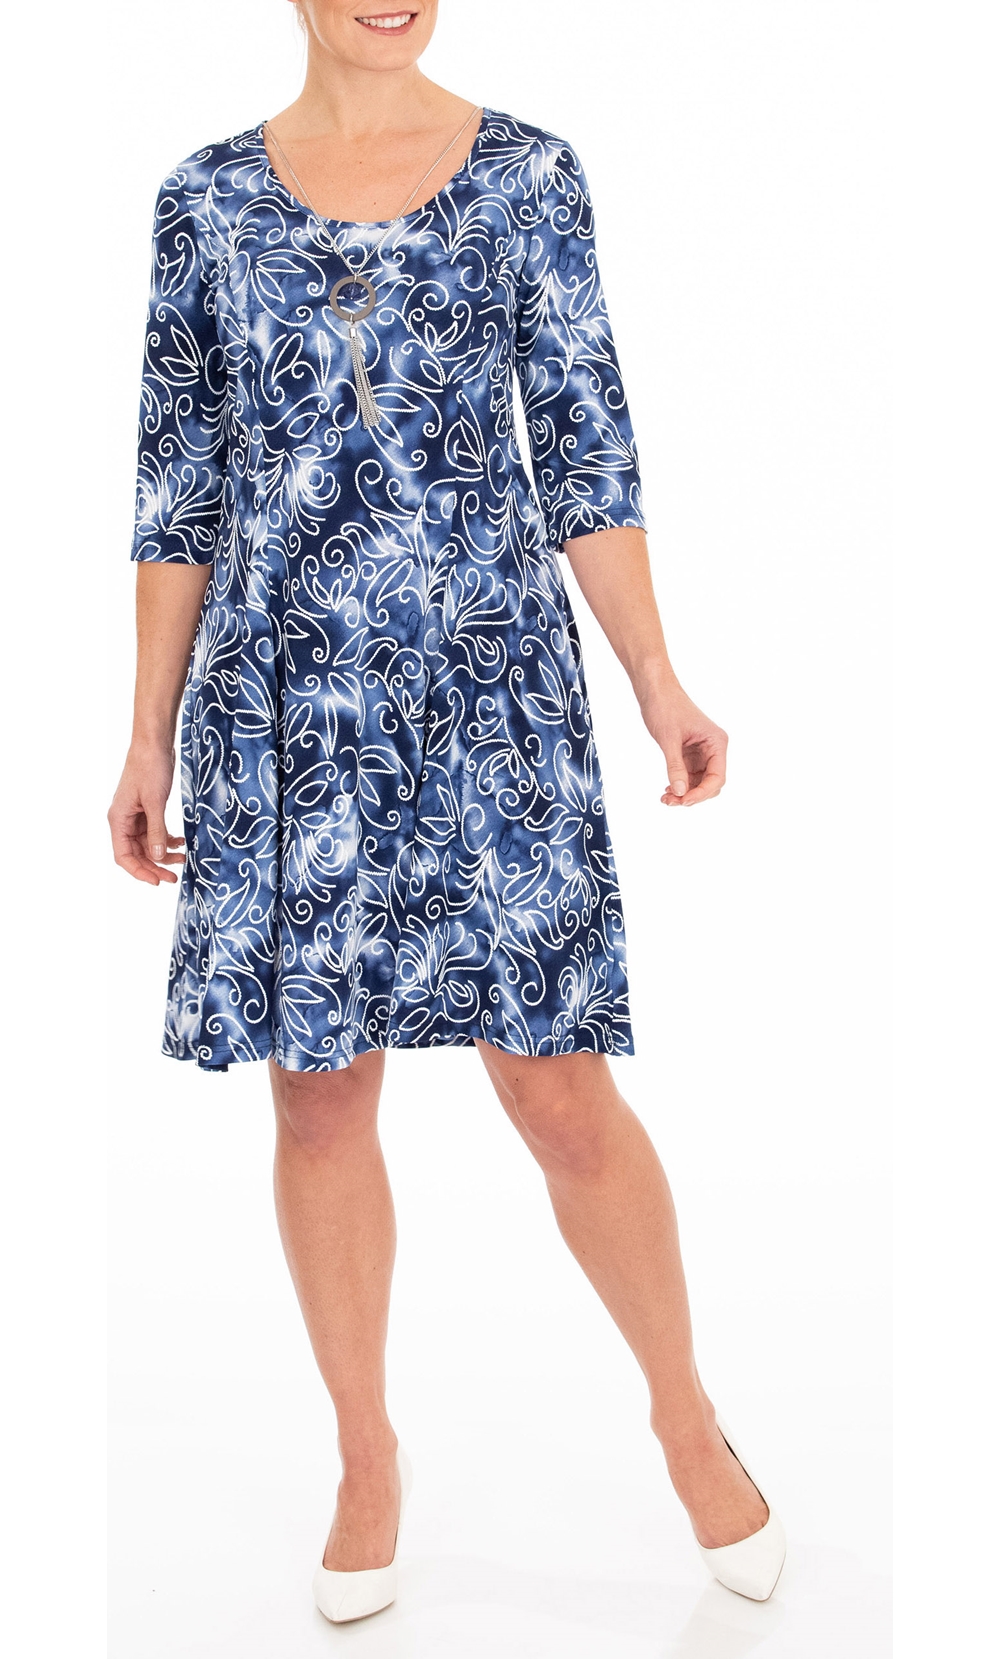 Anna Rose Printed Stretch Dress With Necklace